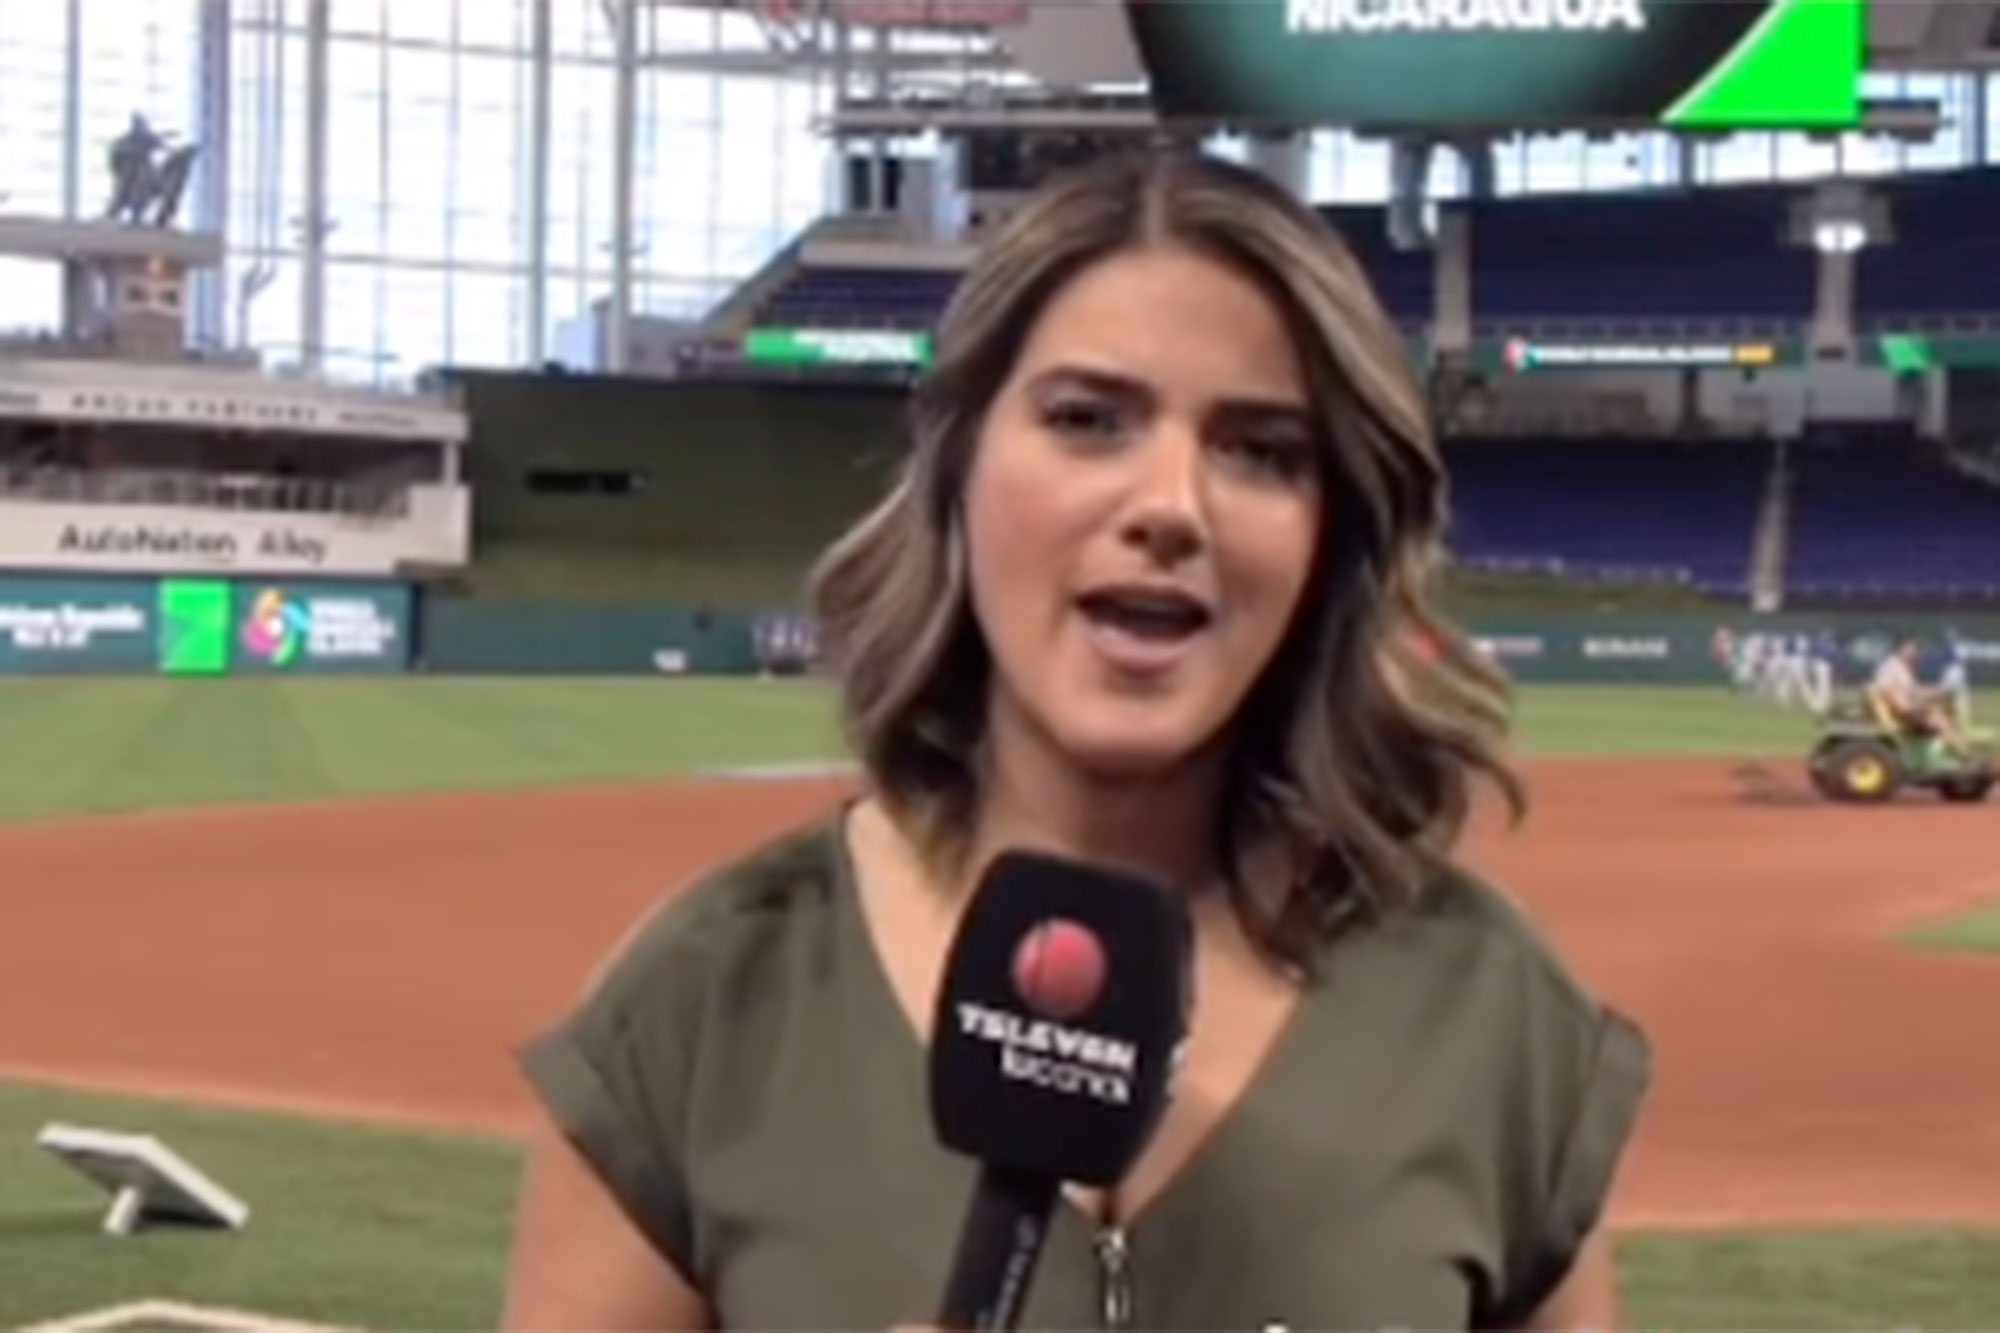 ESPN reporter Marly Rivera fired for calling colleague a 'f***ing c**t'  while cameras rolled